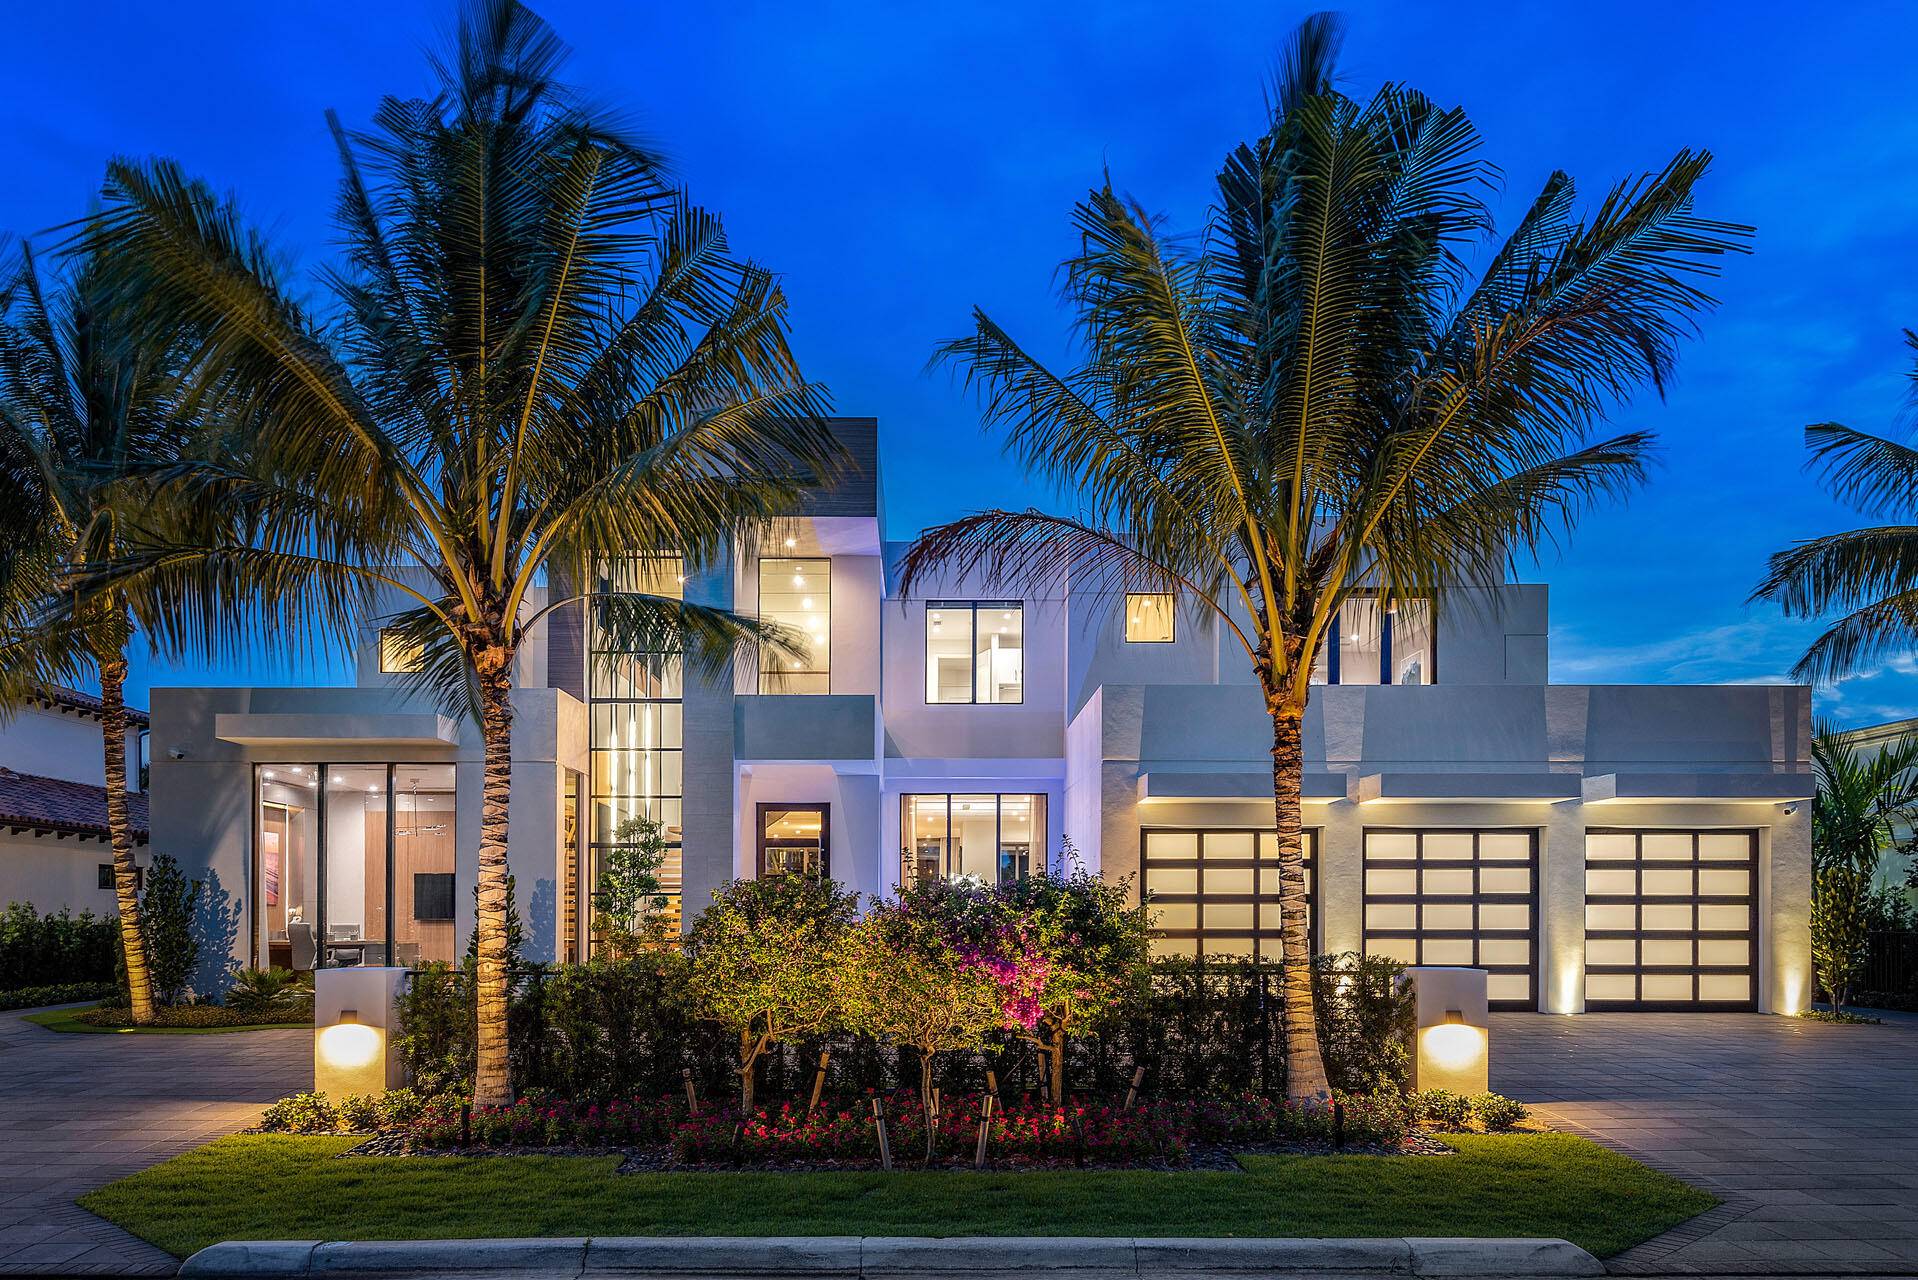 Welcome to 1371 Royal Palm Way, an extraordinary masterpiece crafted by SRD Building Corp.